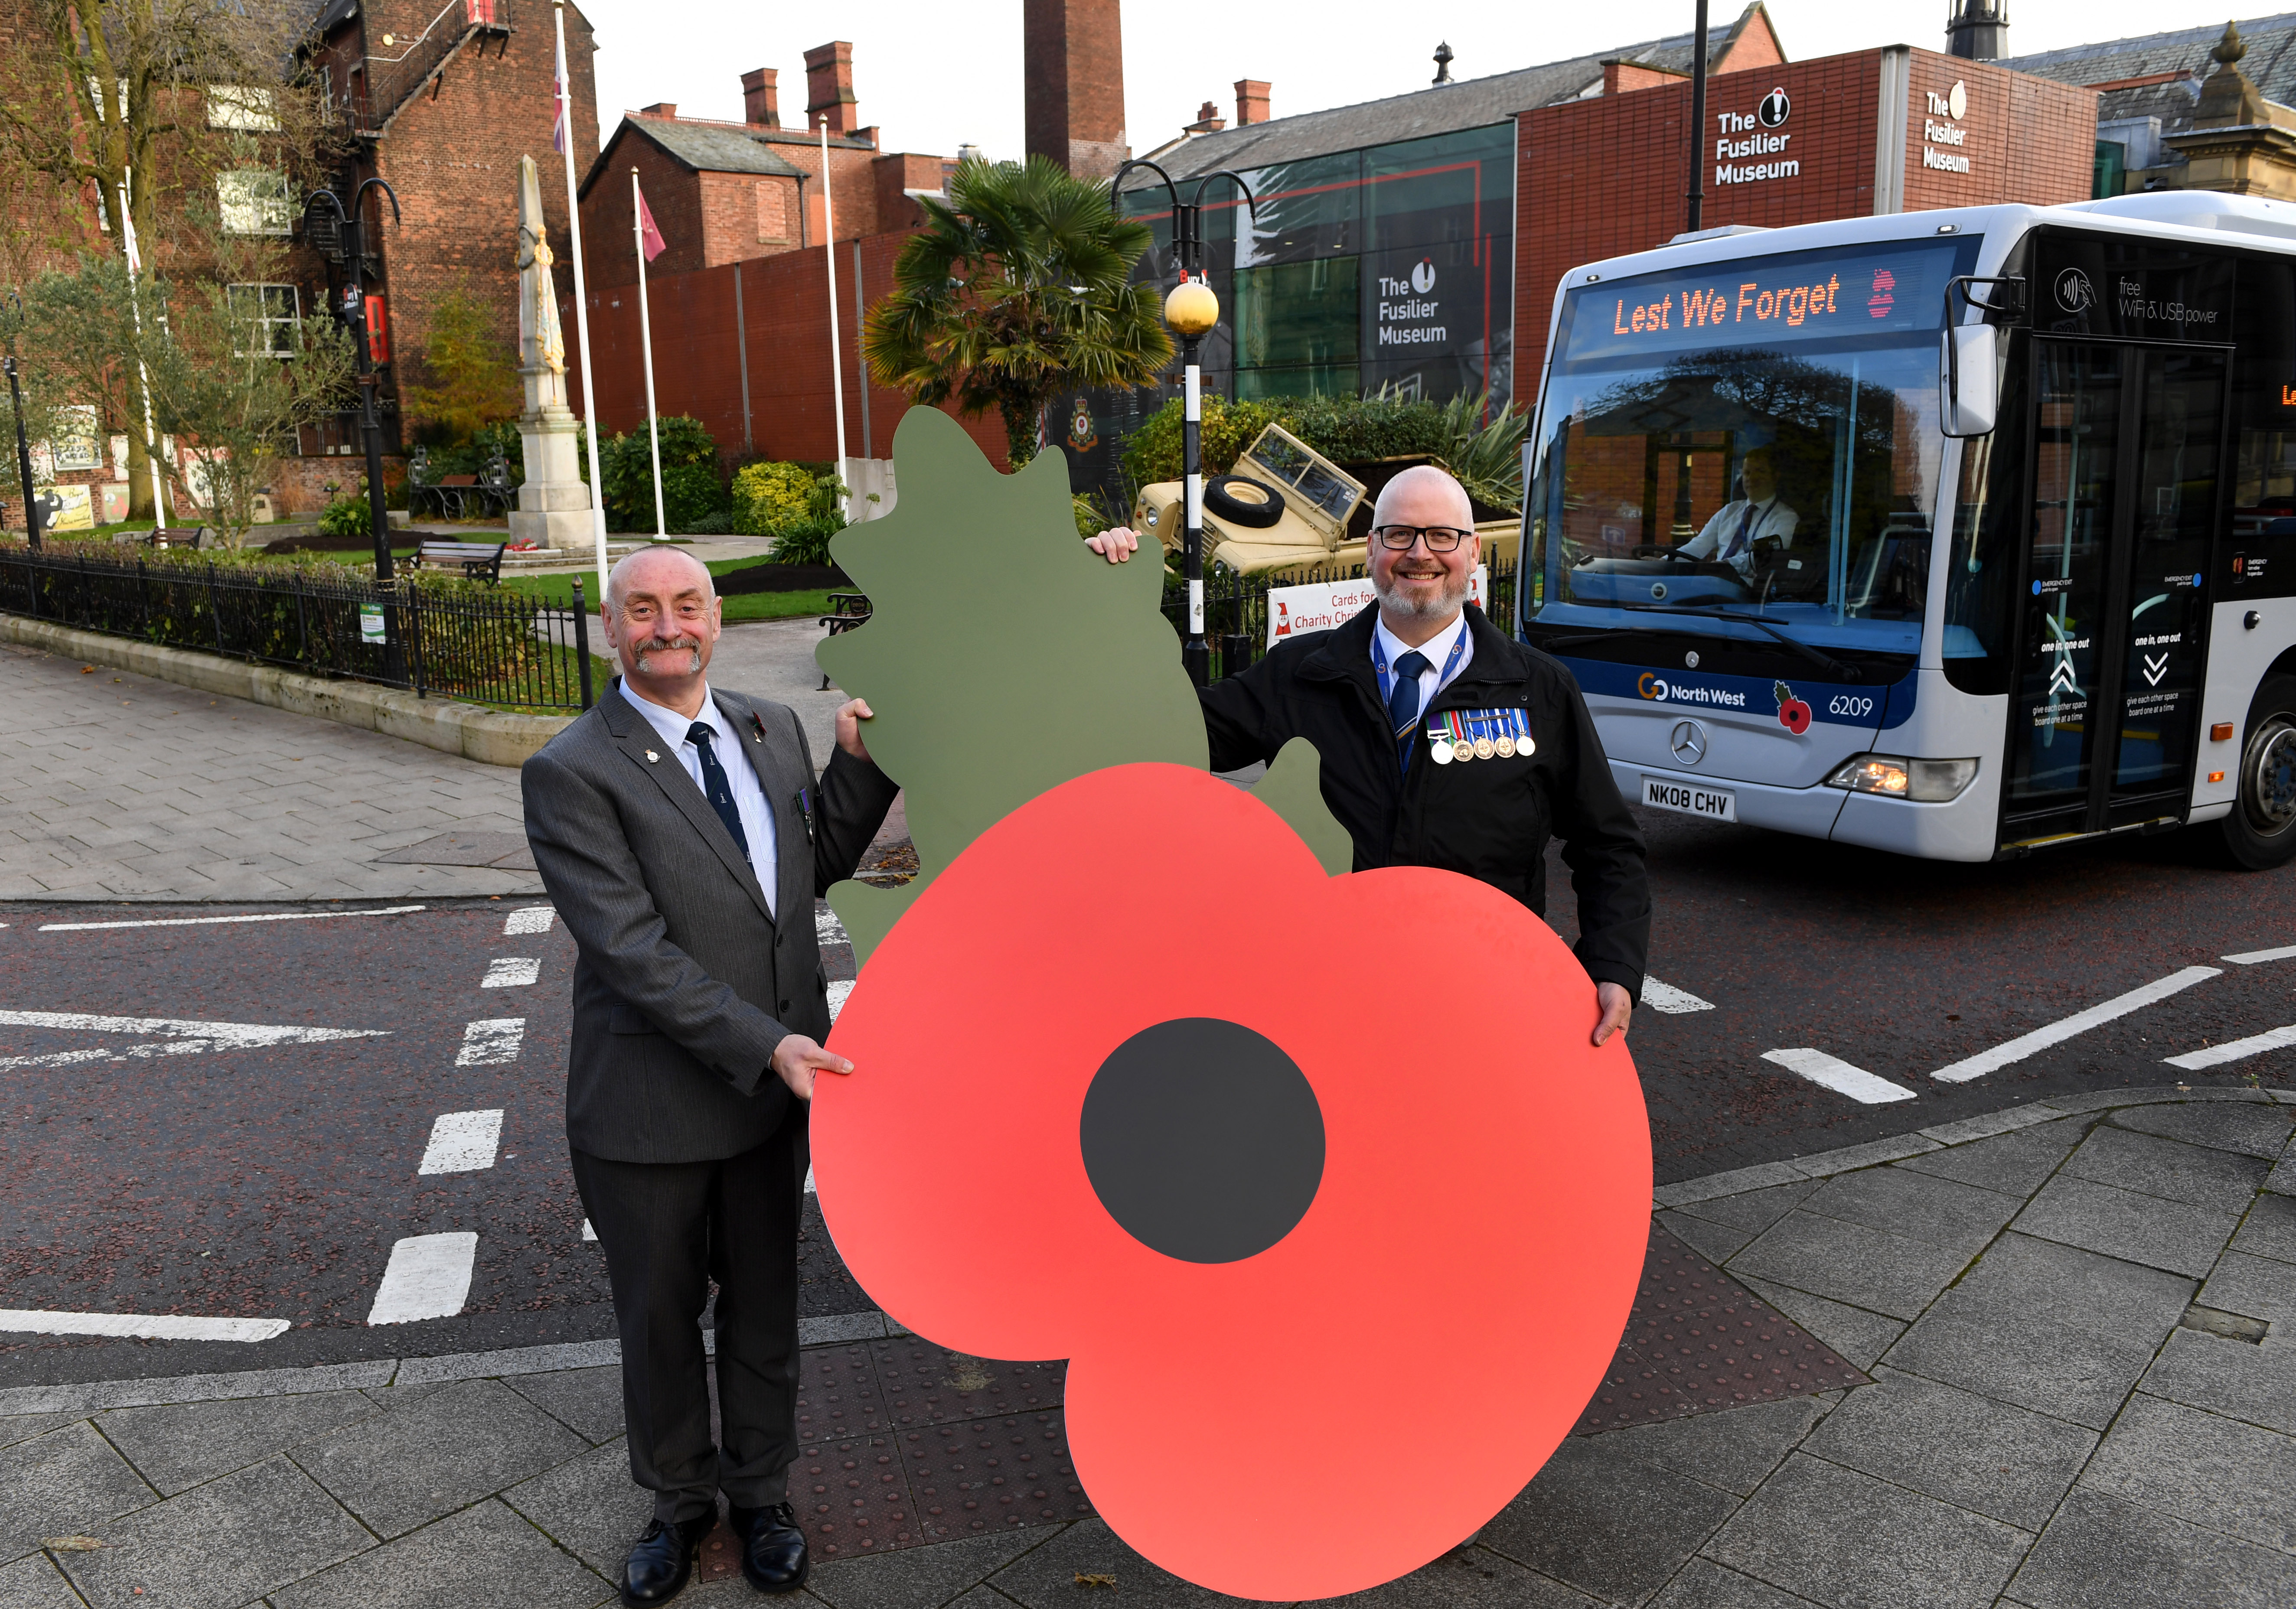 Veterans travel free with Go North West